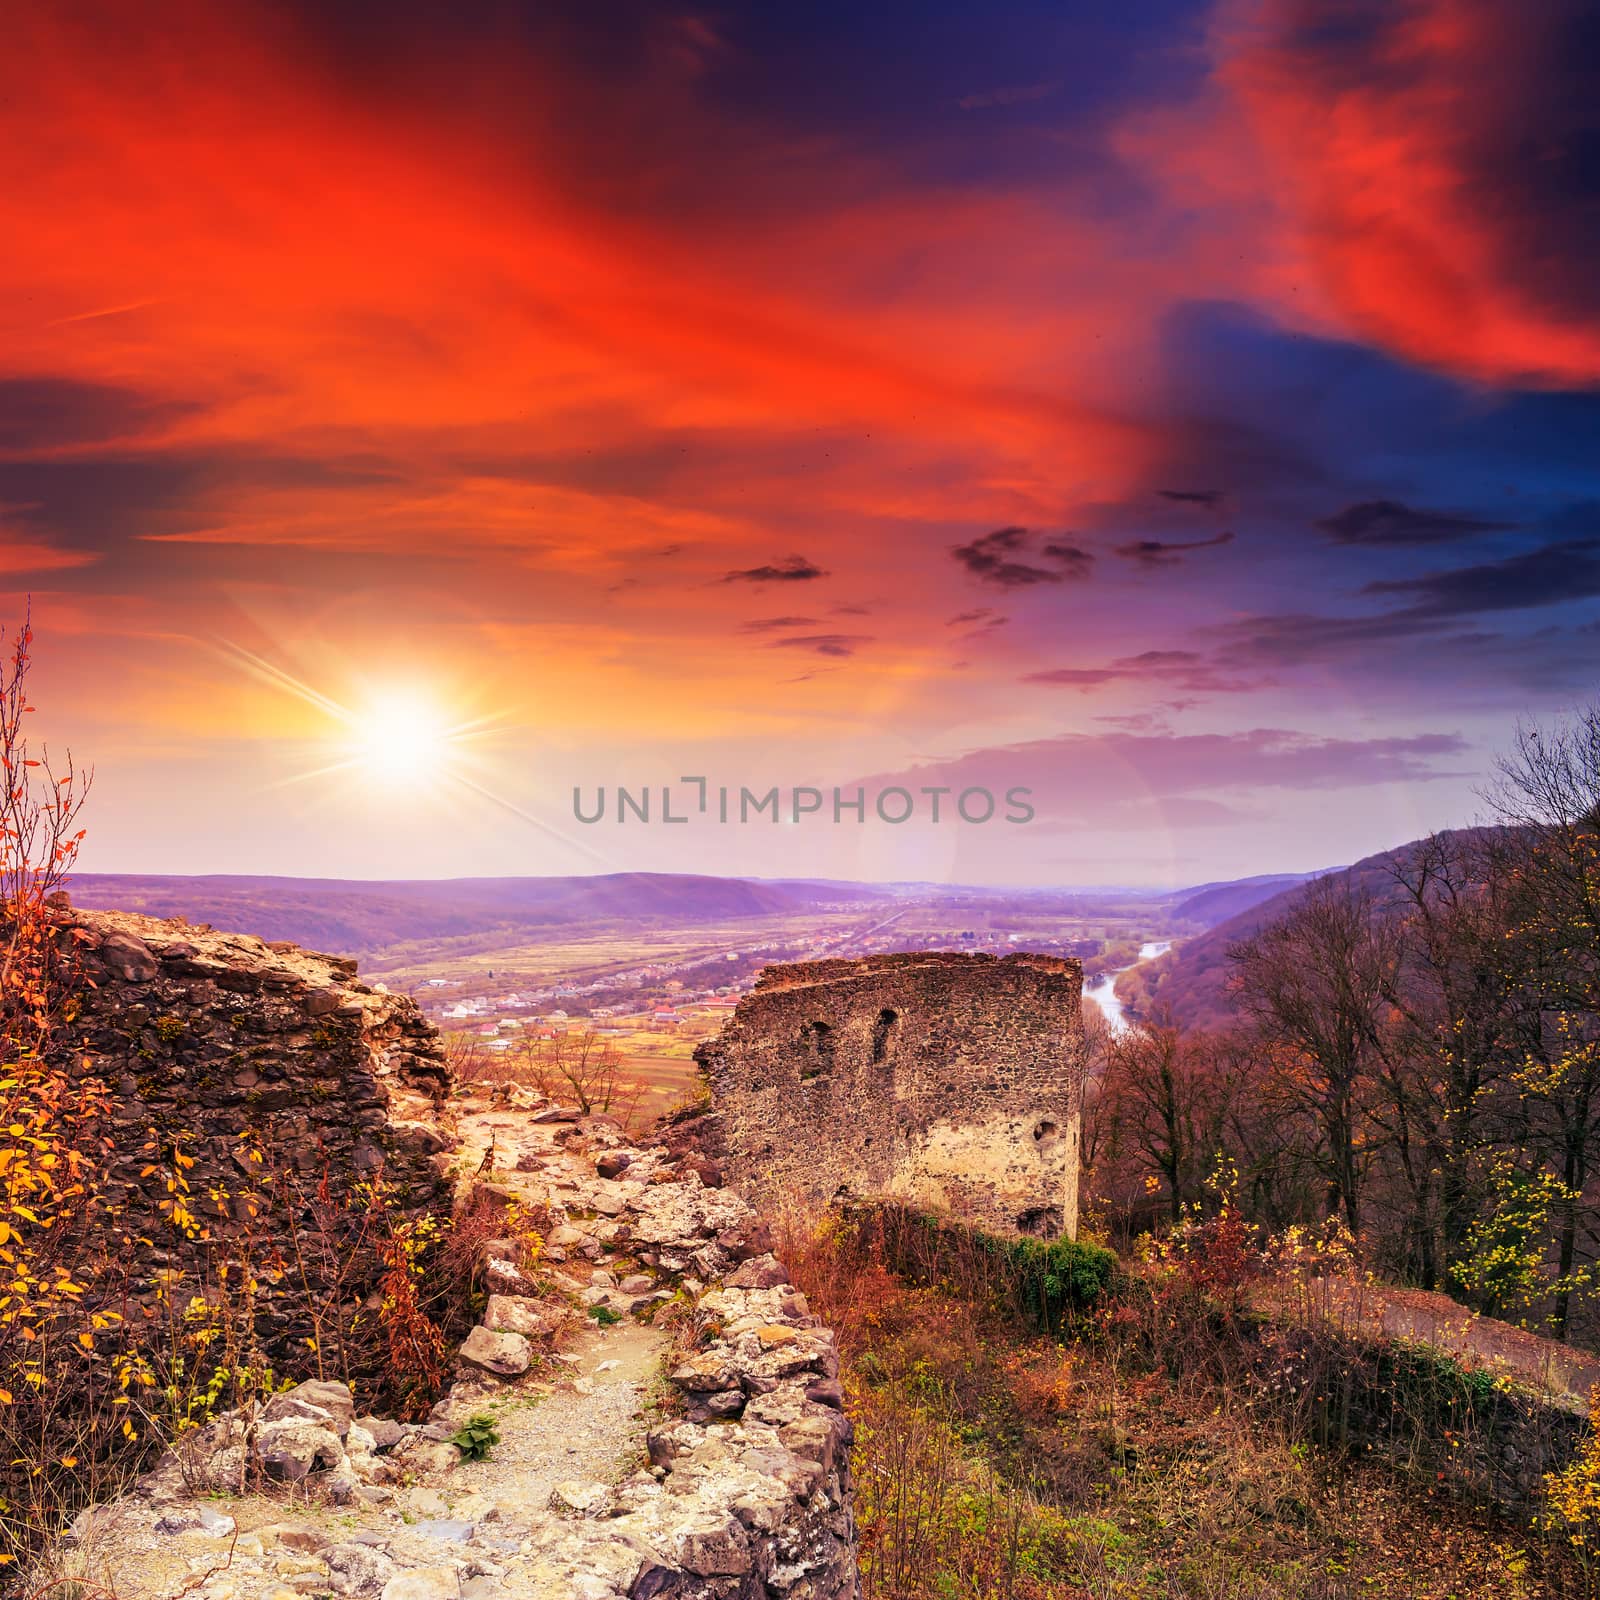 ruins of an old castle in the mountains at sunset by Pellinni